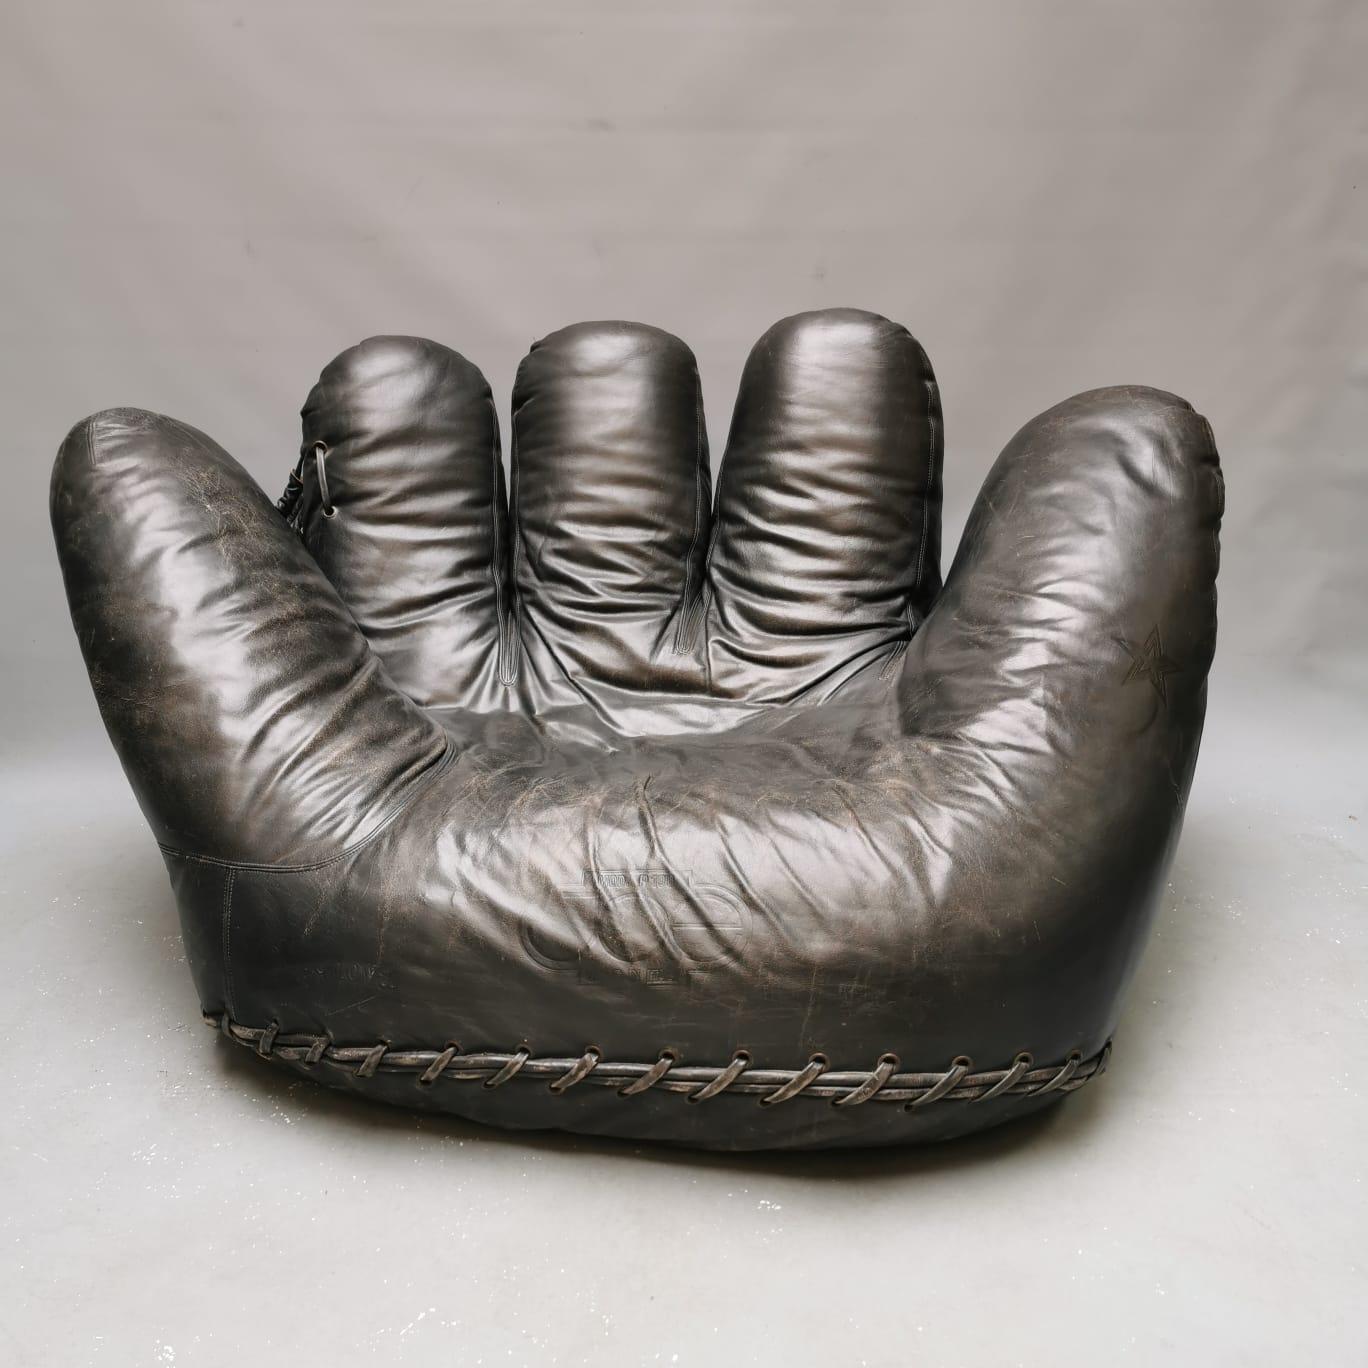 An armchair designed in the form of a giant baseball glove mounted on invisible wheels. Designers De Pas, D'Urbino & Lomazzi wanted to express their admiration for one of the most mythified characters in American baseball Joe Di Maggio. Clearly, the